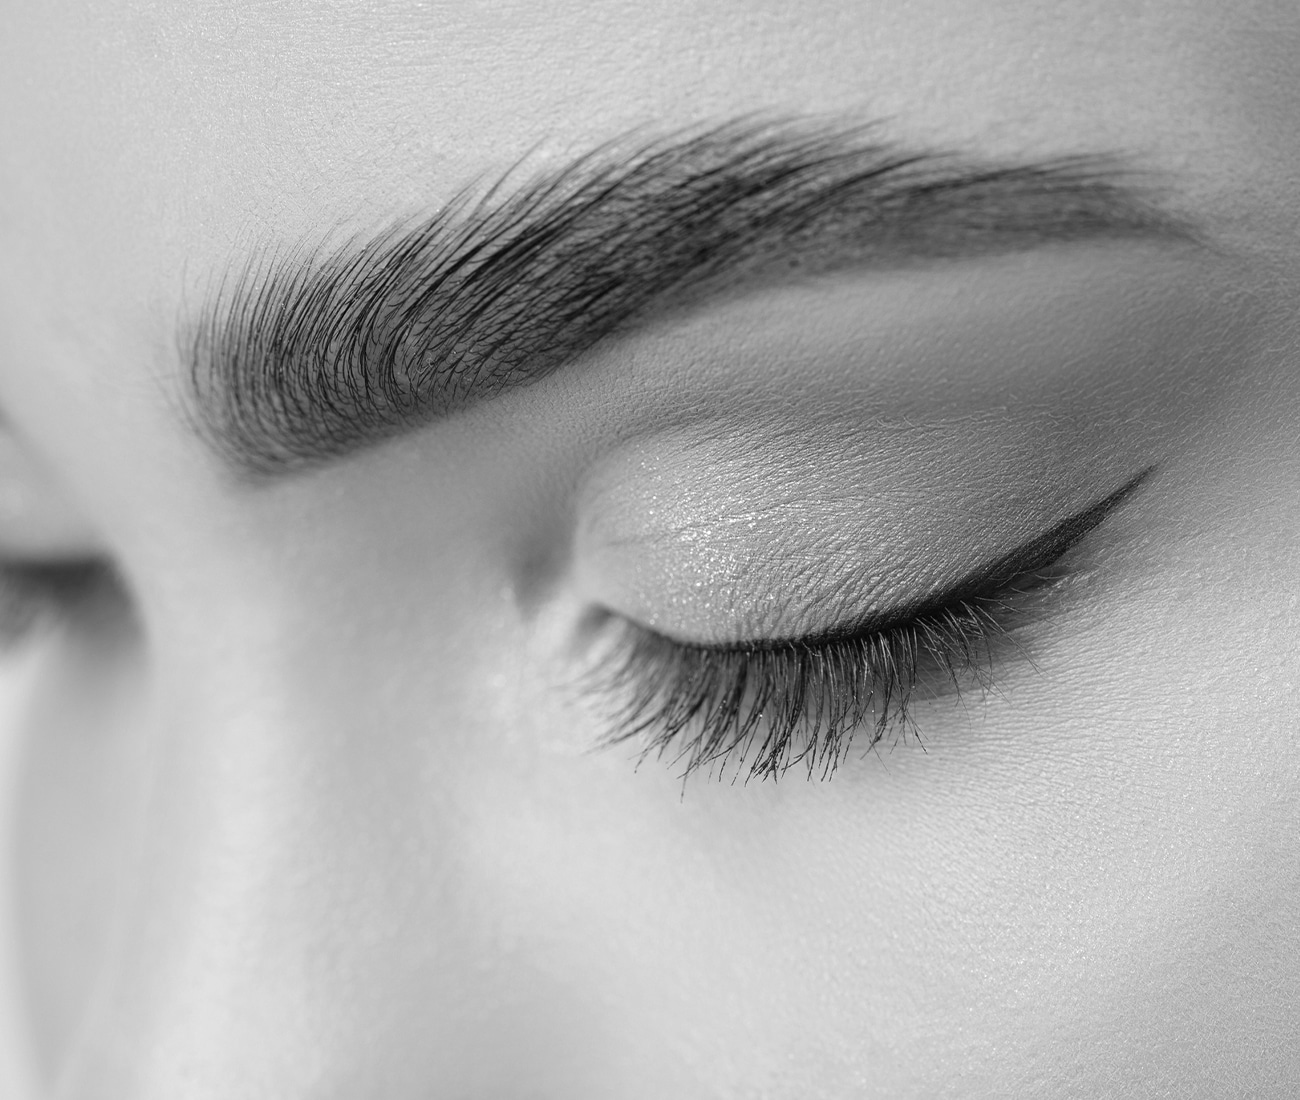 A Close Up Of Woman's Eye Makeup And Eyebrow, Black And White